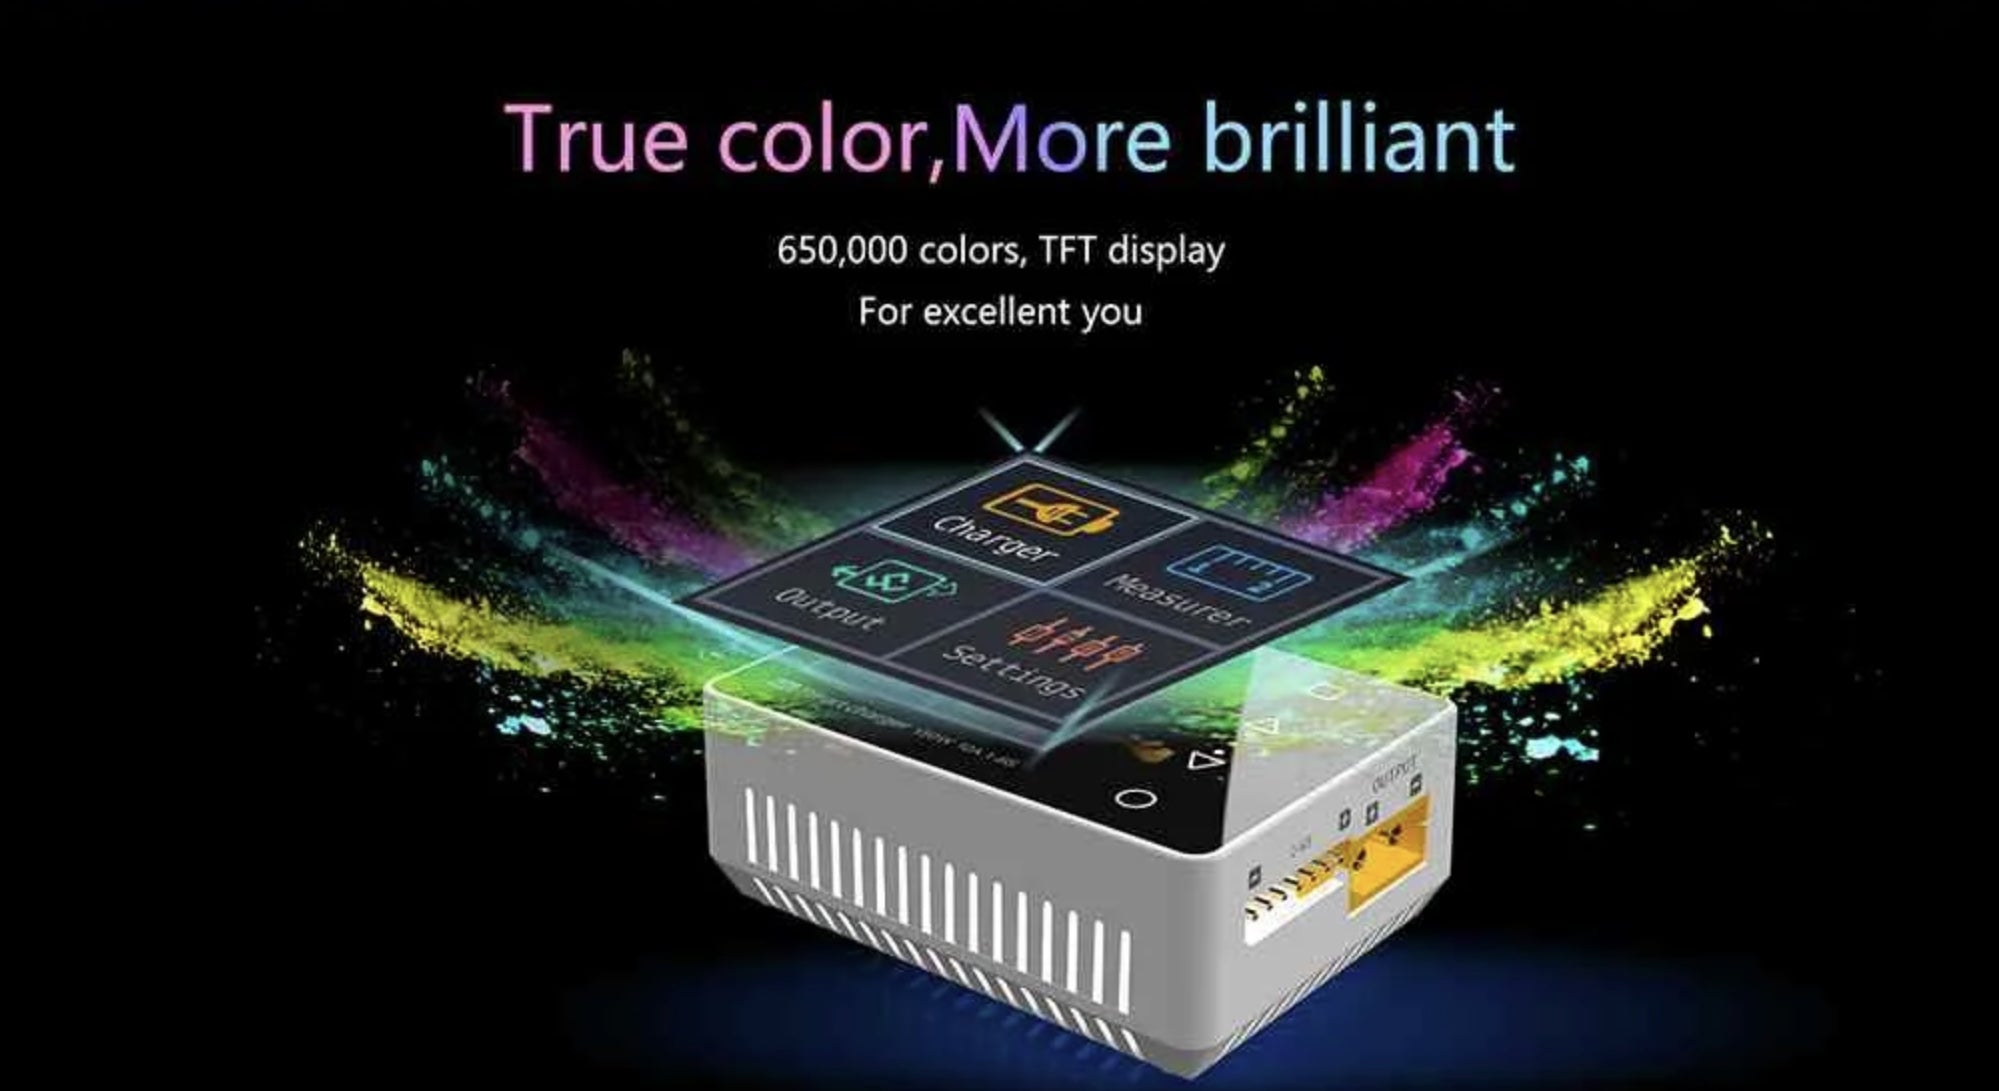 ToolkitRC M6 Charger, True color 1 More brilliant 650,000 colors, TFT display For excellent you LS Chara